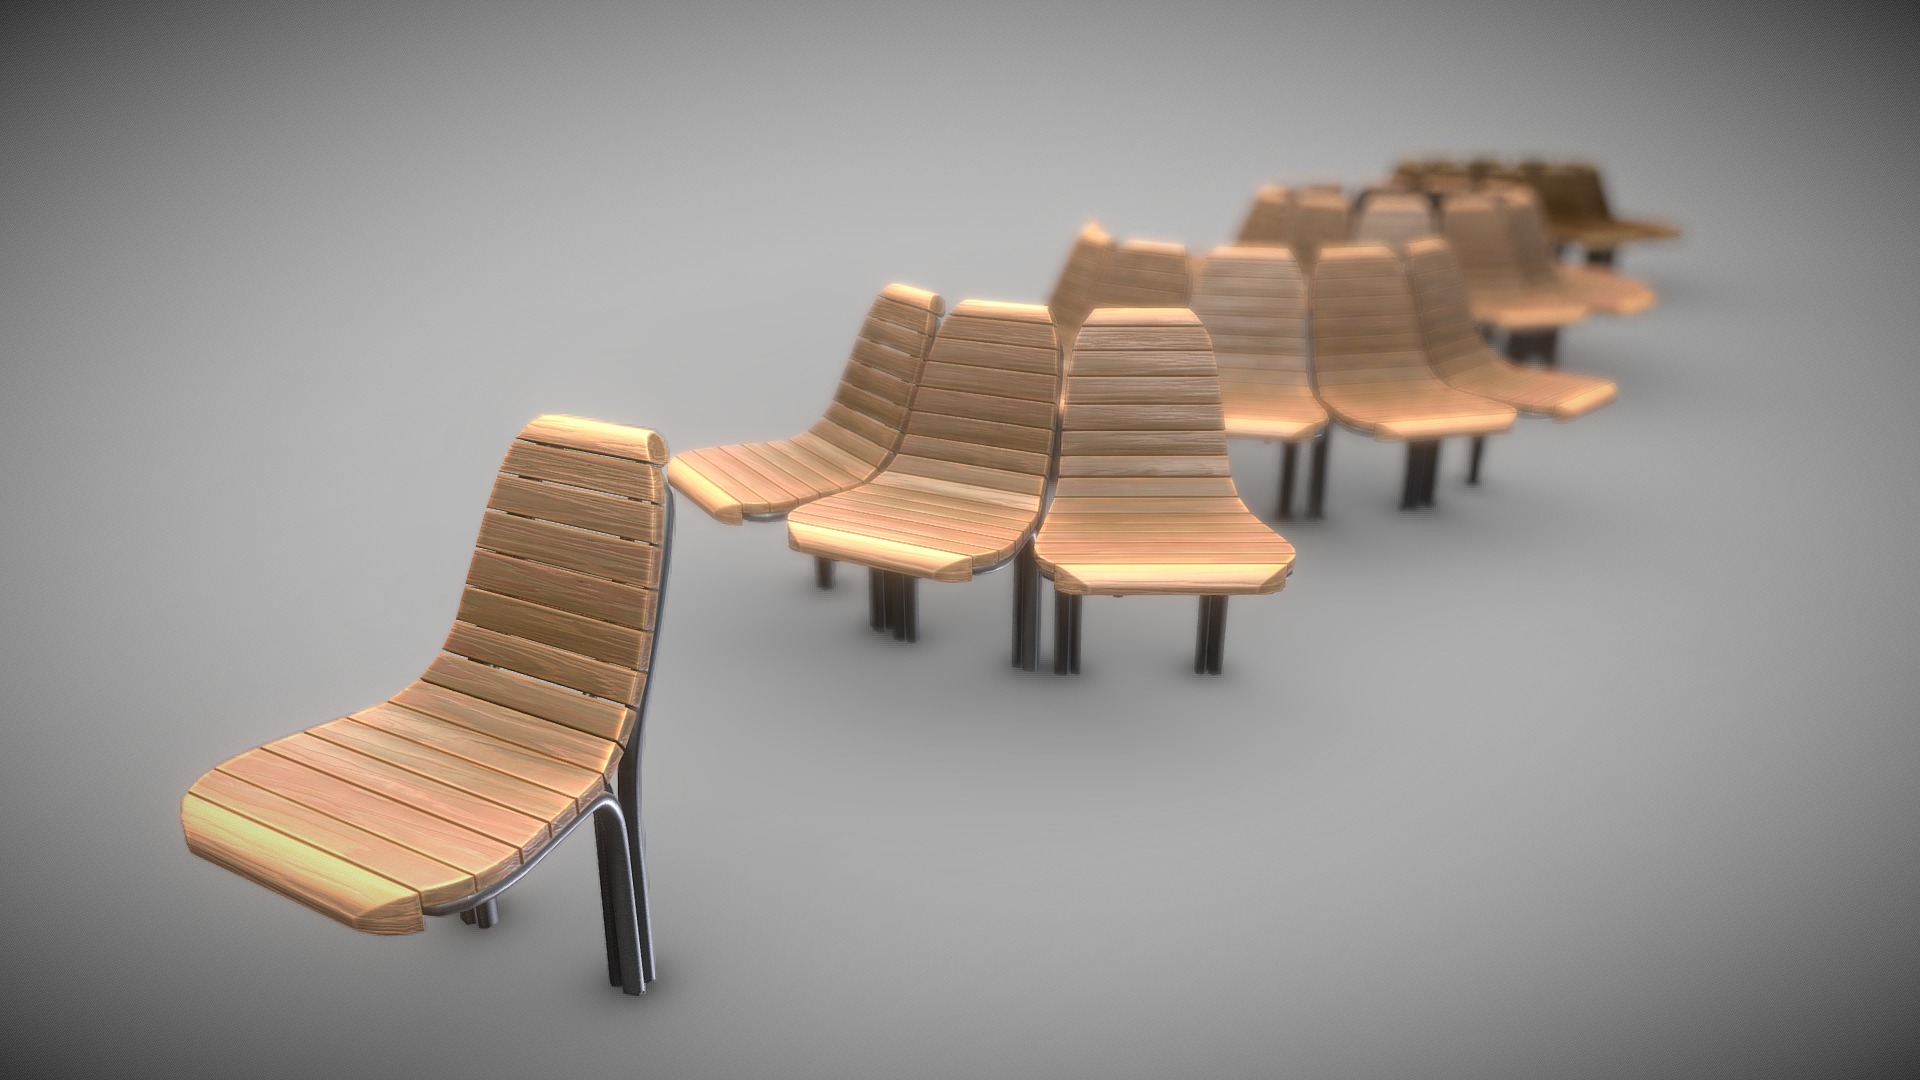 3D model Round Bench [7] 4 parts Wood Metal Version 1 - This is a 3D model of the Round Bench [7] 4 parts Wood Metal Version 1. The 3D model is about a row of wooden chairs.